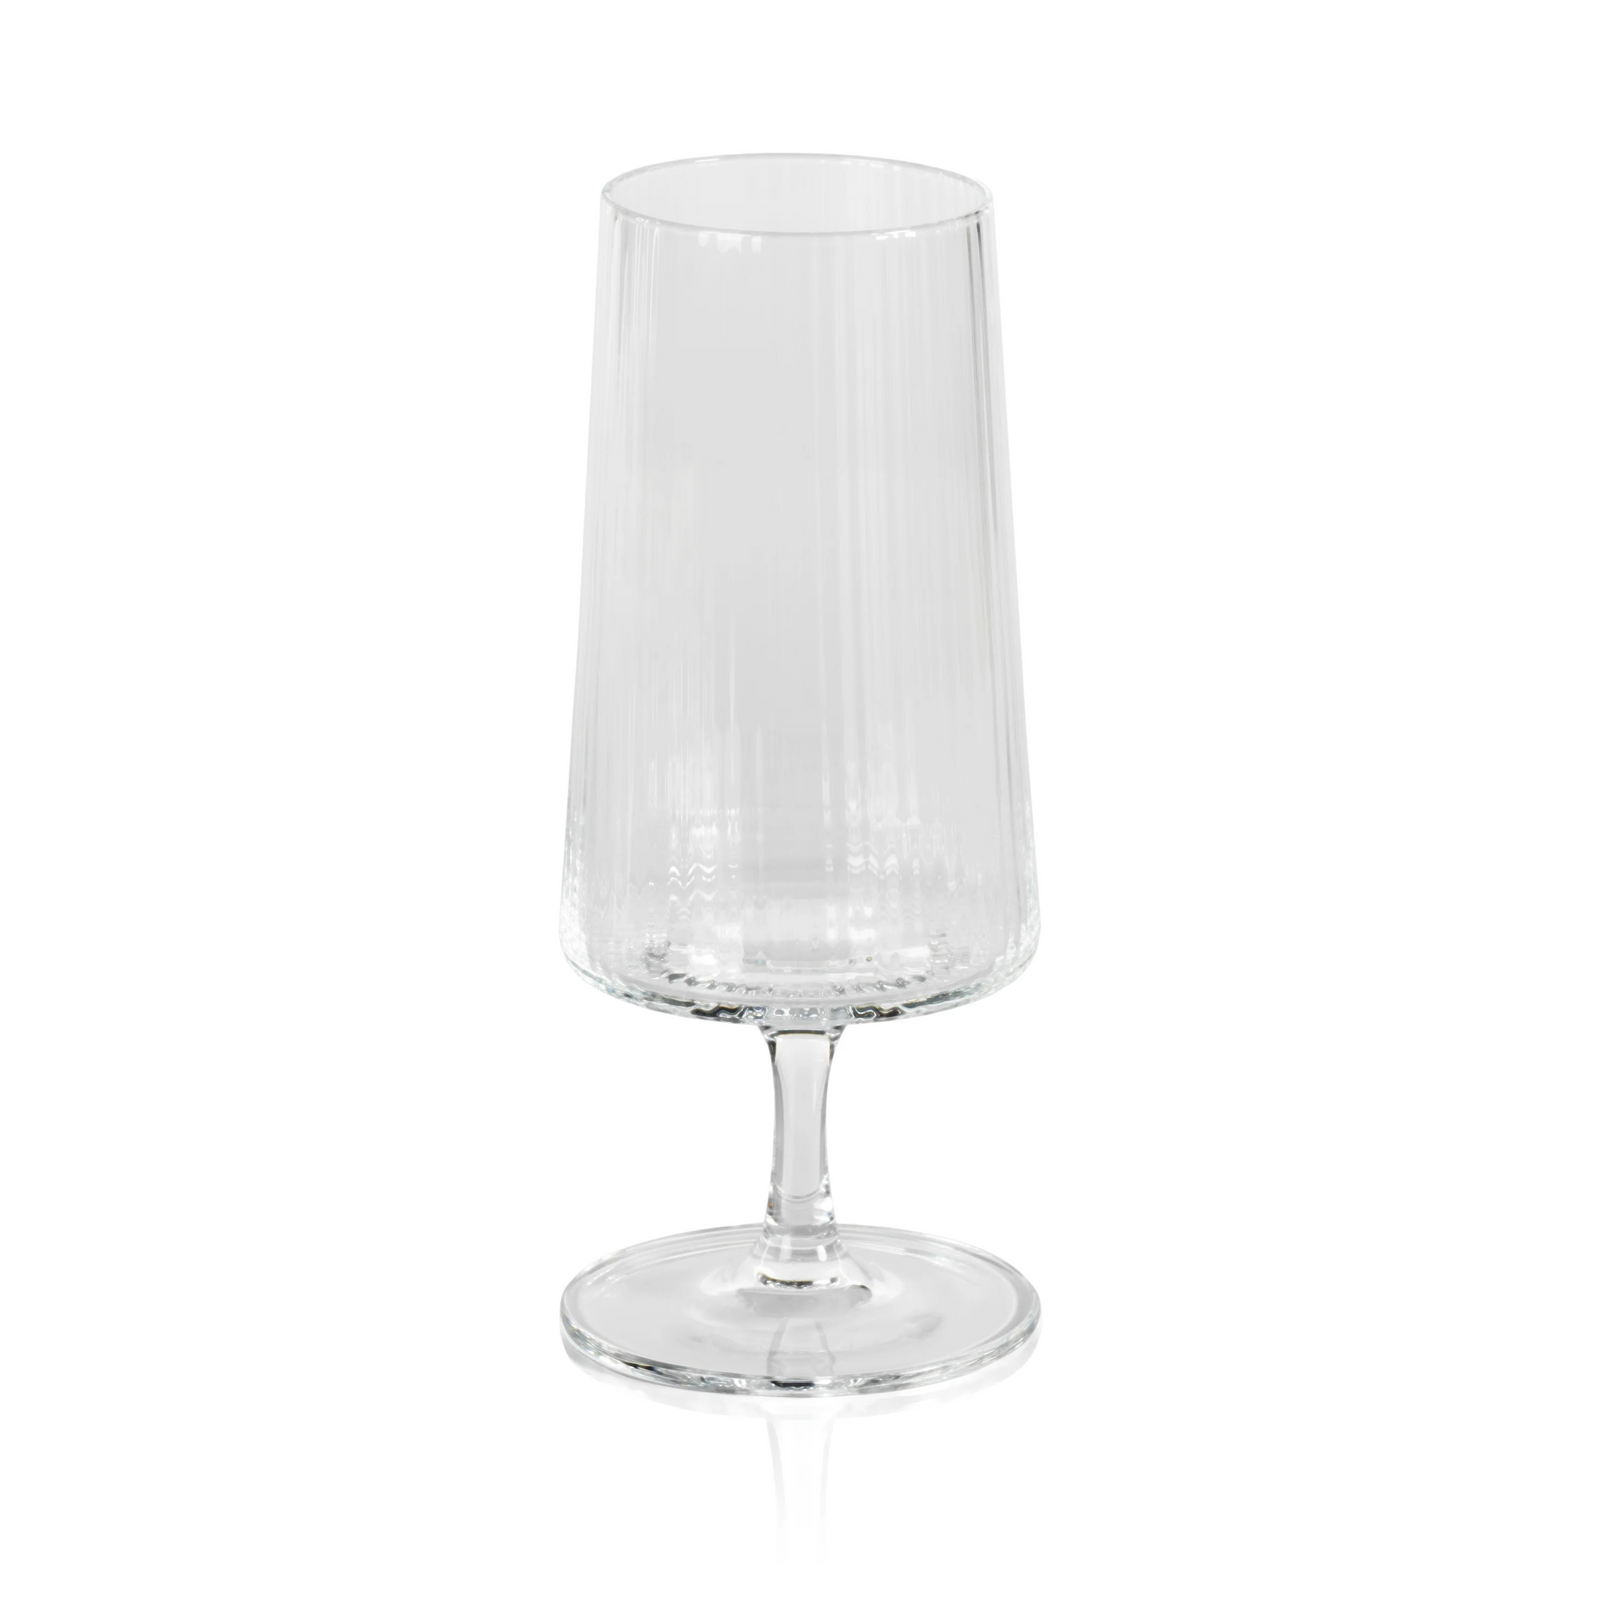 https://cdn.shopify.com/s/files/1/0893/1636/products/Bandol-Fluted-Textured-Cocktail-Glass_1600x.png?v=1675719023